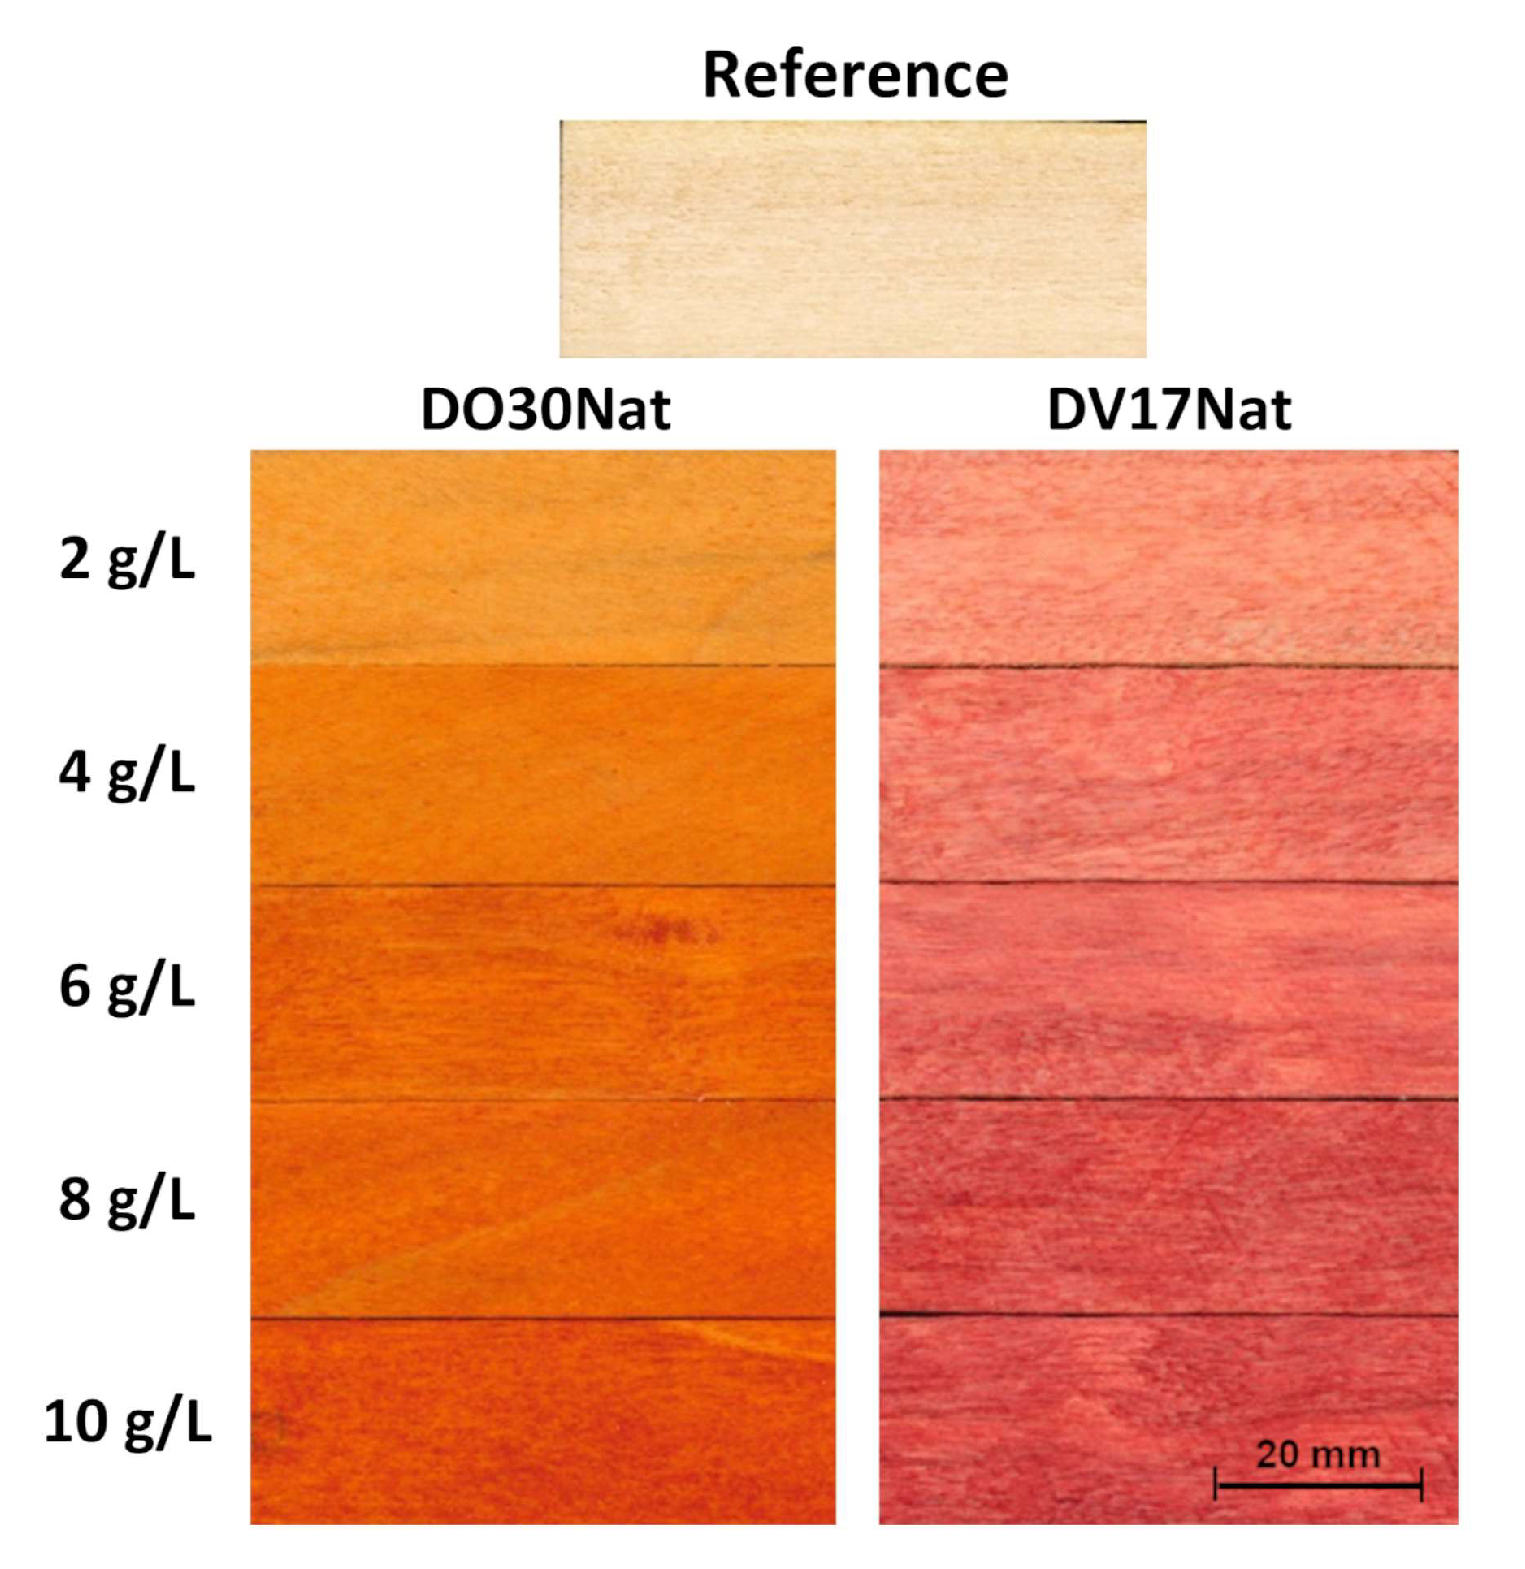 Wood dyes - dye is applied for blending in different species of wood